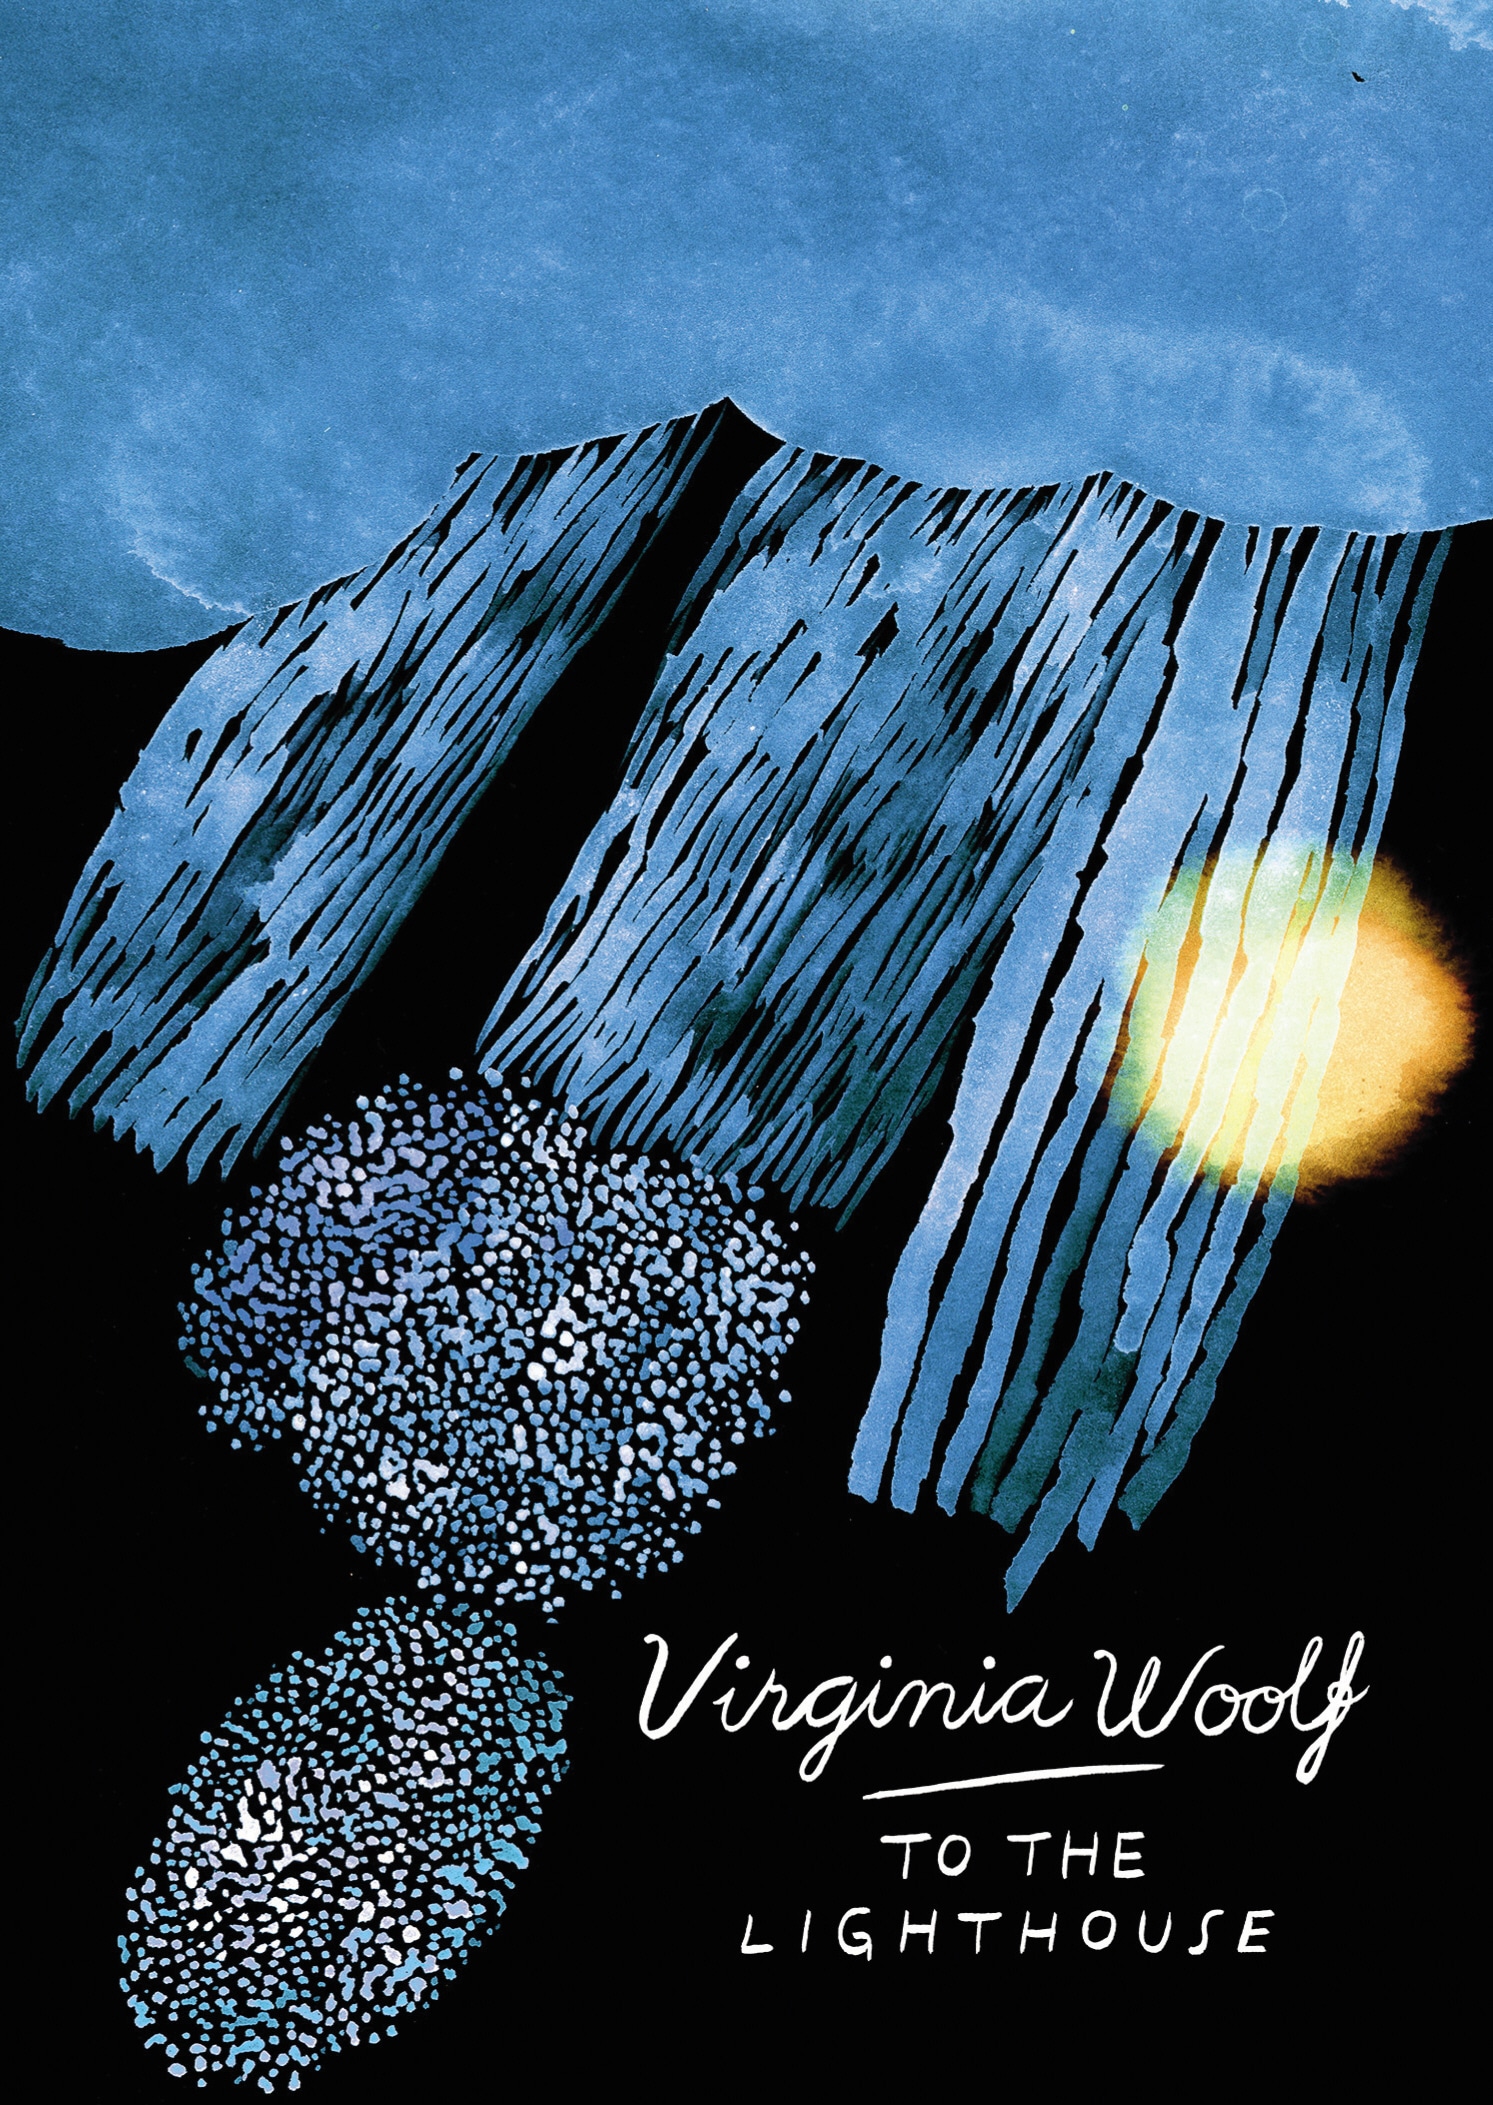 Book “To The Lighthouse (Vintage Classics Woolf Series)” by Virginia Woolf — October 6, 2016